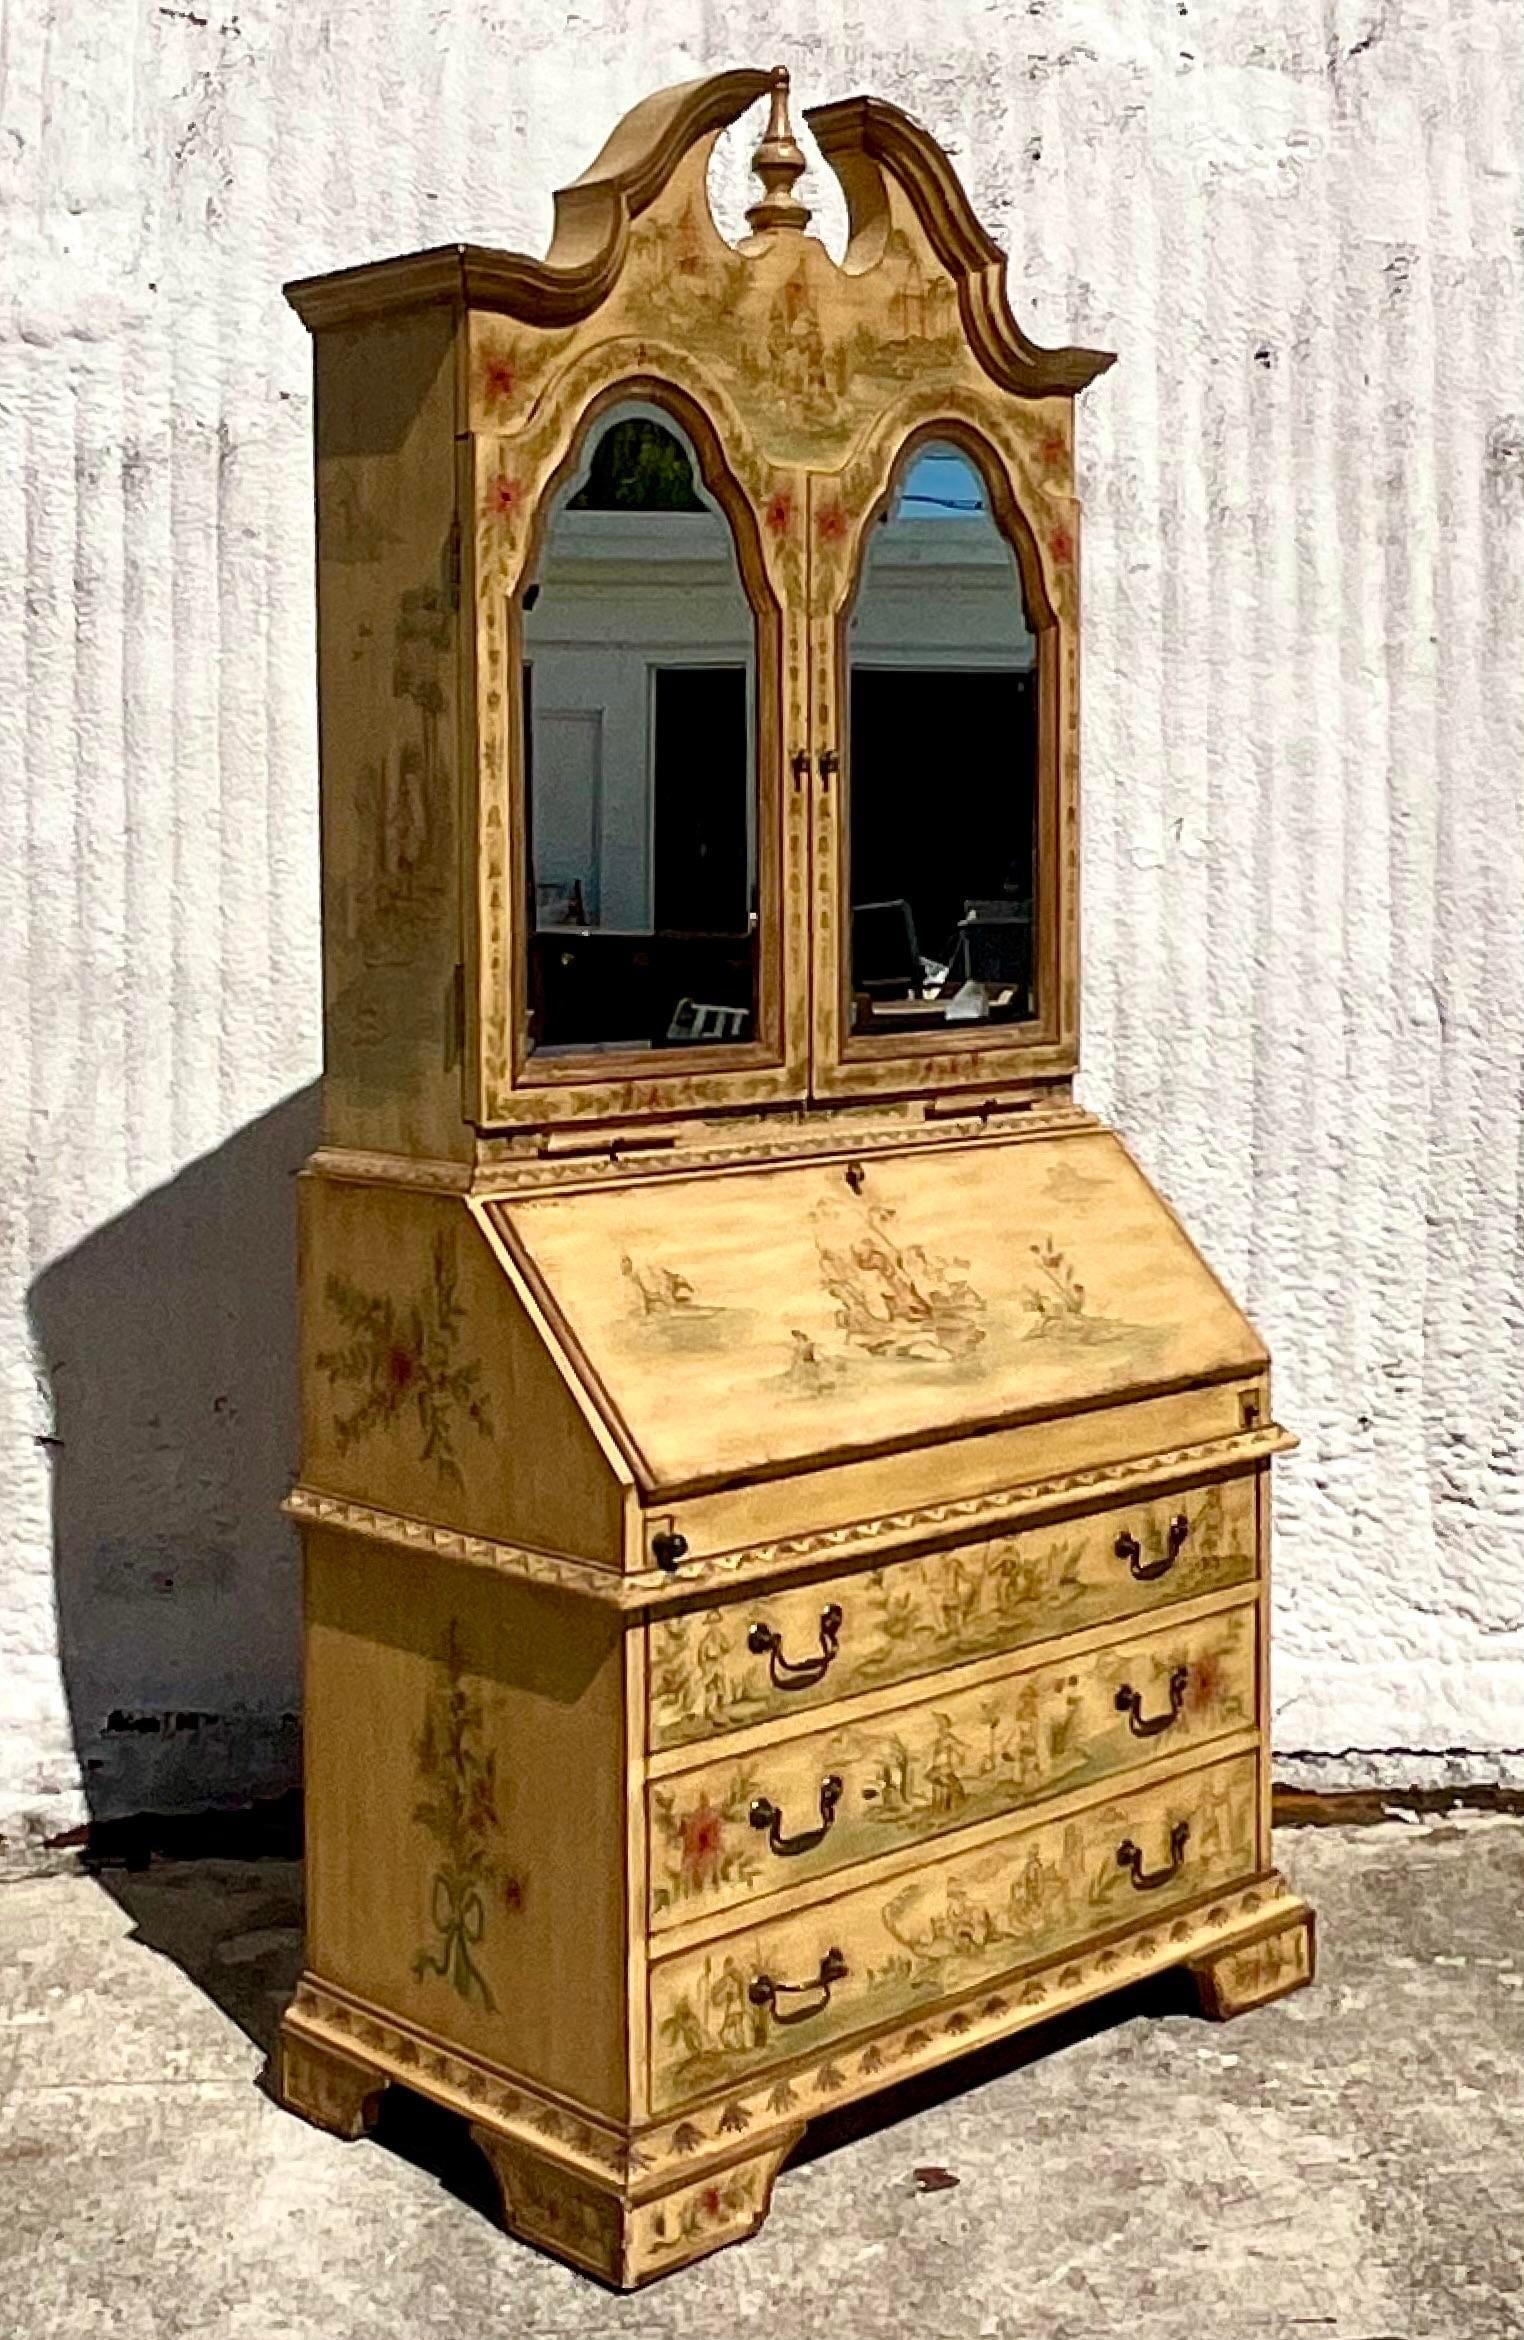 A stunning vintage Regency Secretary desk. Beautiful hand painted Chinoiserie detail on a saffron yellow background. Beautiful mirrored doors with a beveled edge. Lots of great little doors and drawers and a drop front desk surface. Acquired from a